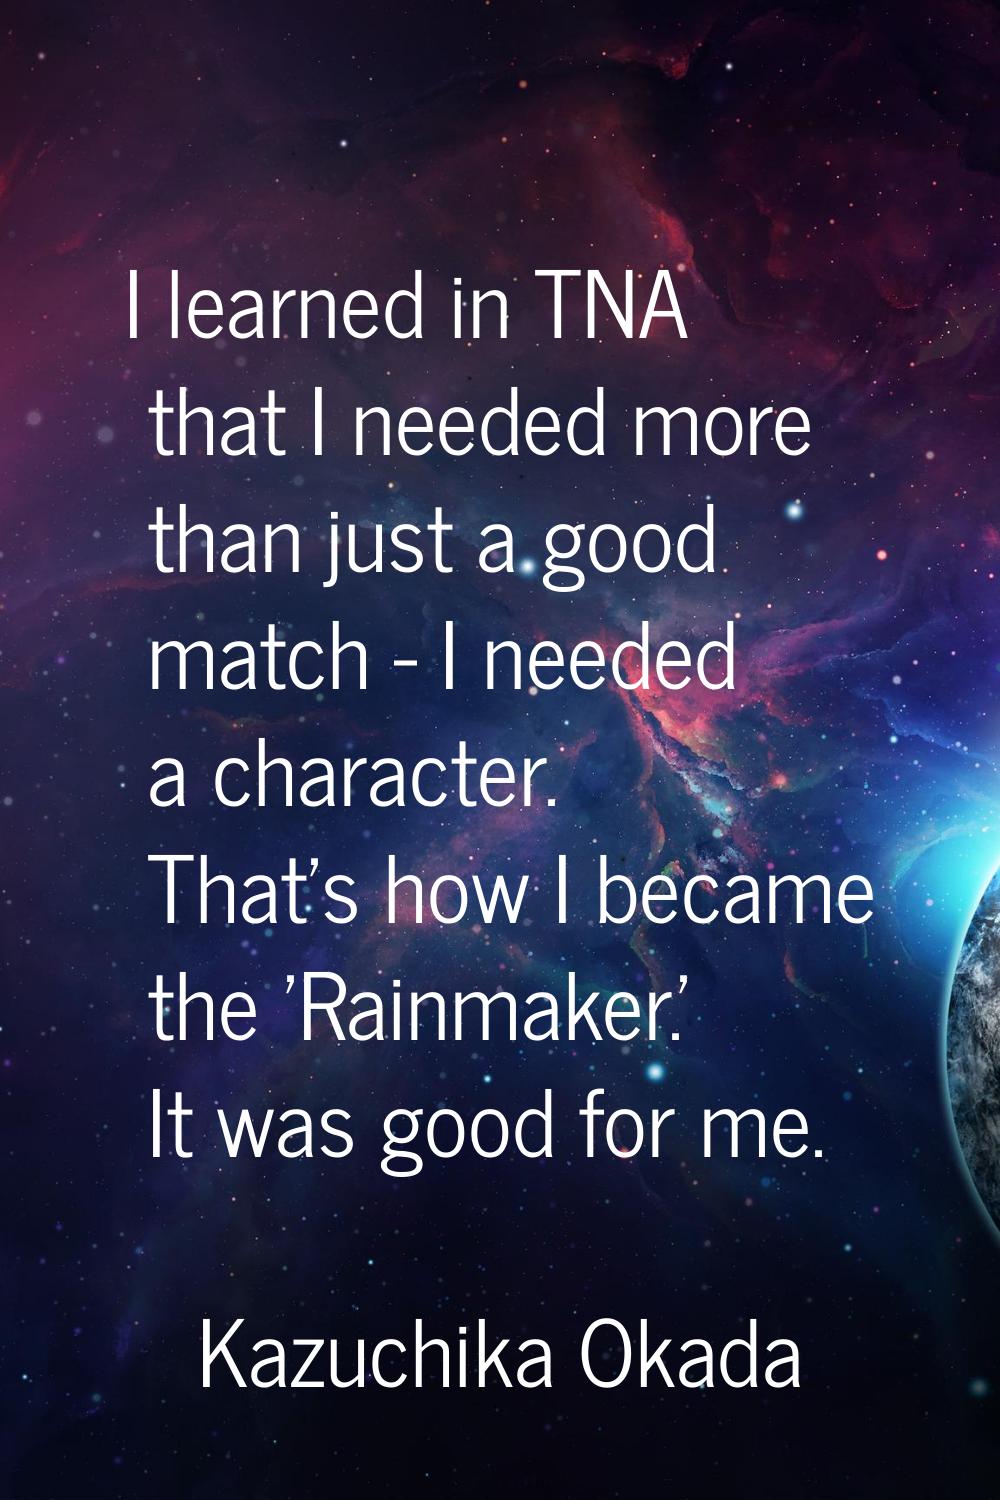 I learned in TNA that I needed more than just a good match - I needed a character. That's how I bec